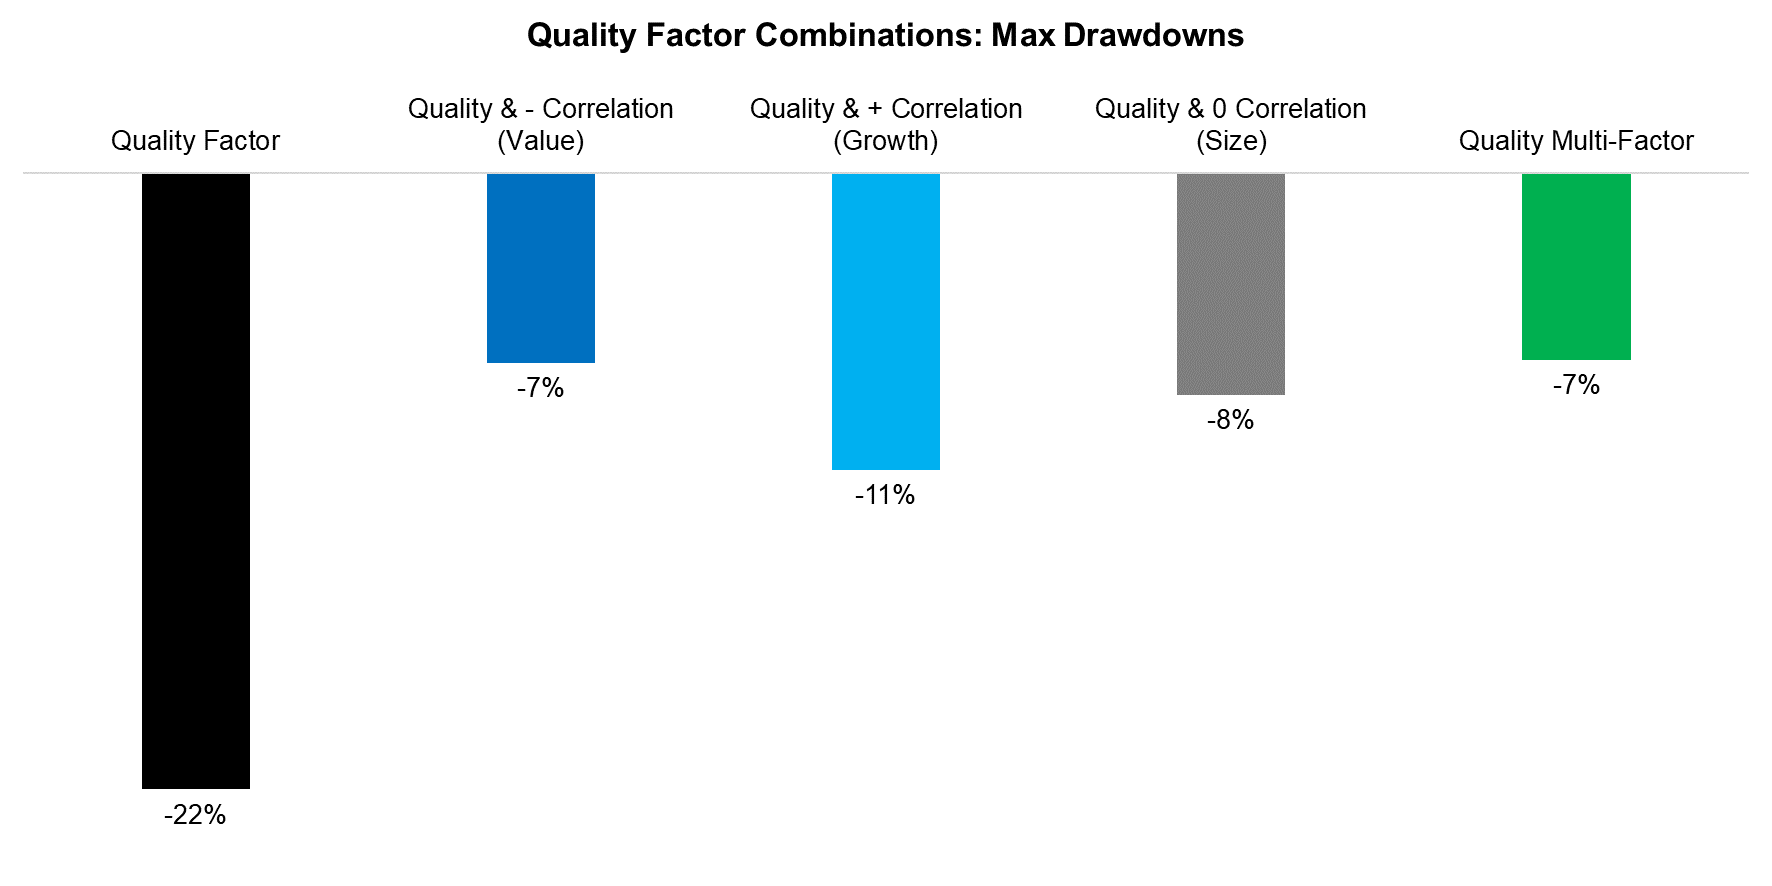 Quality Factor Combinations Max Drawdowns